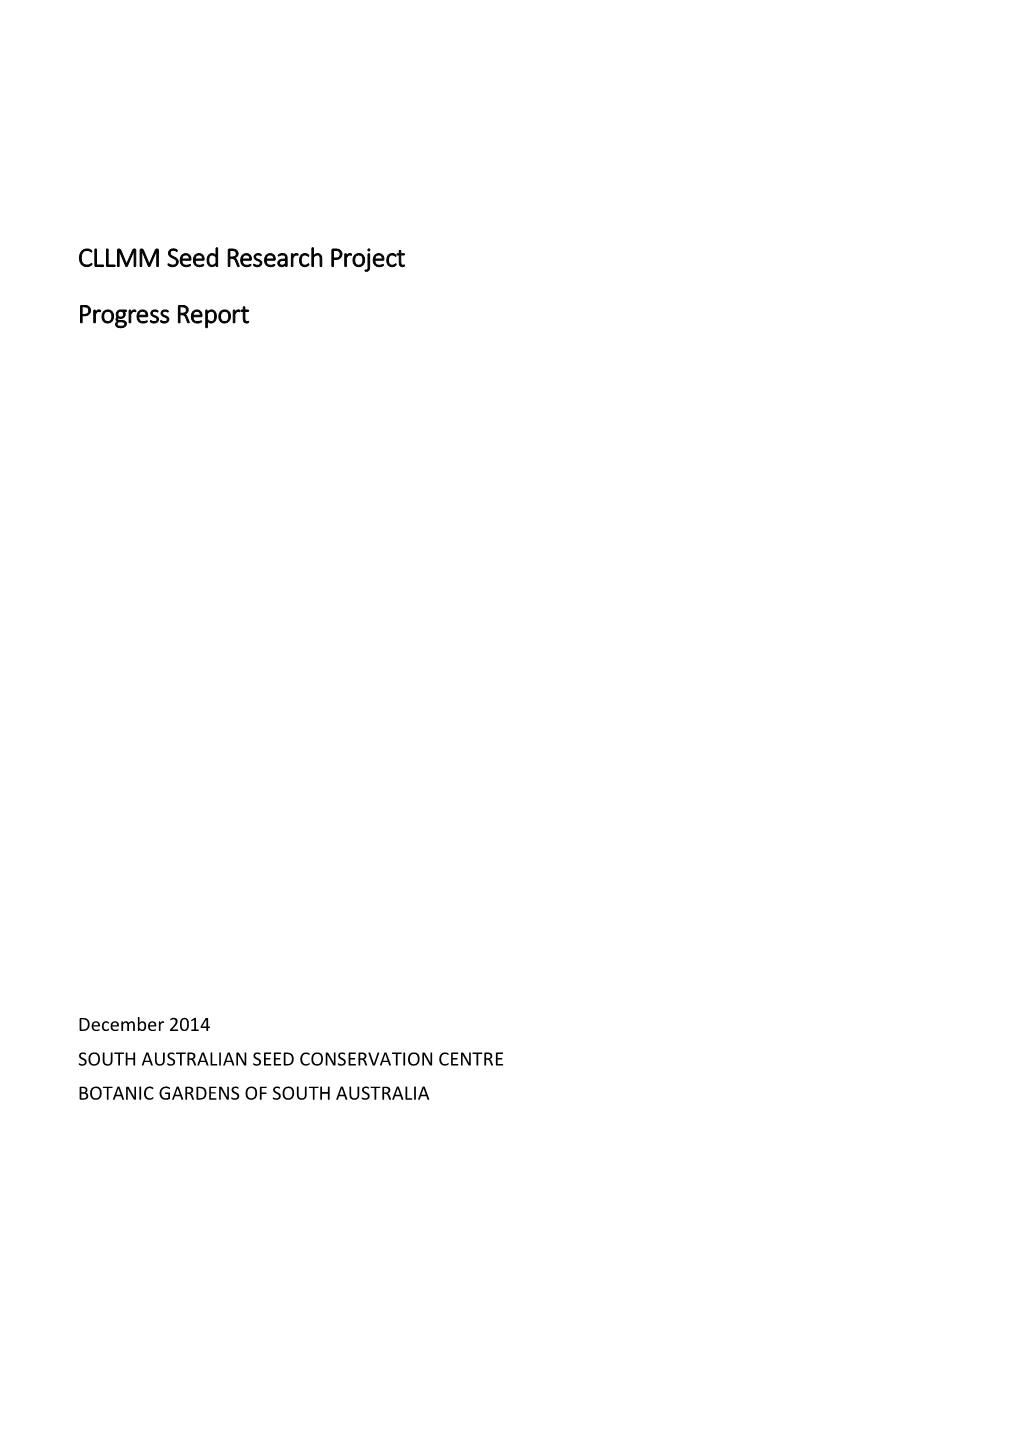 CLLMM Seed Research Project Progress Report